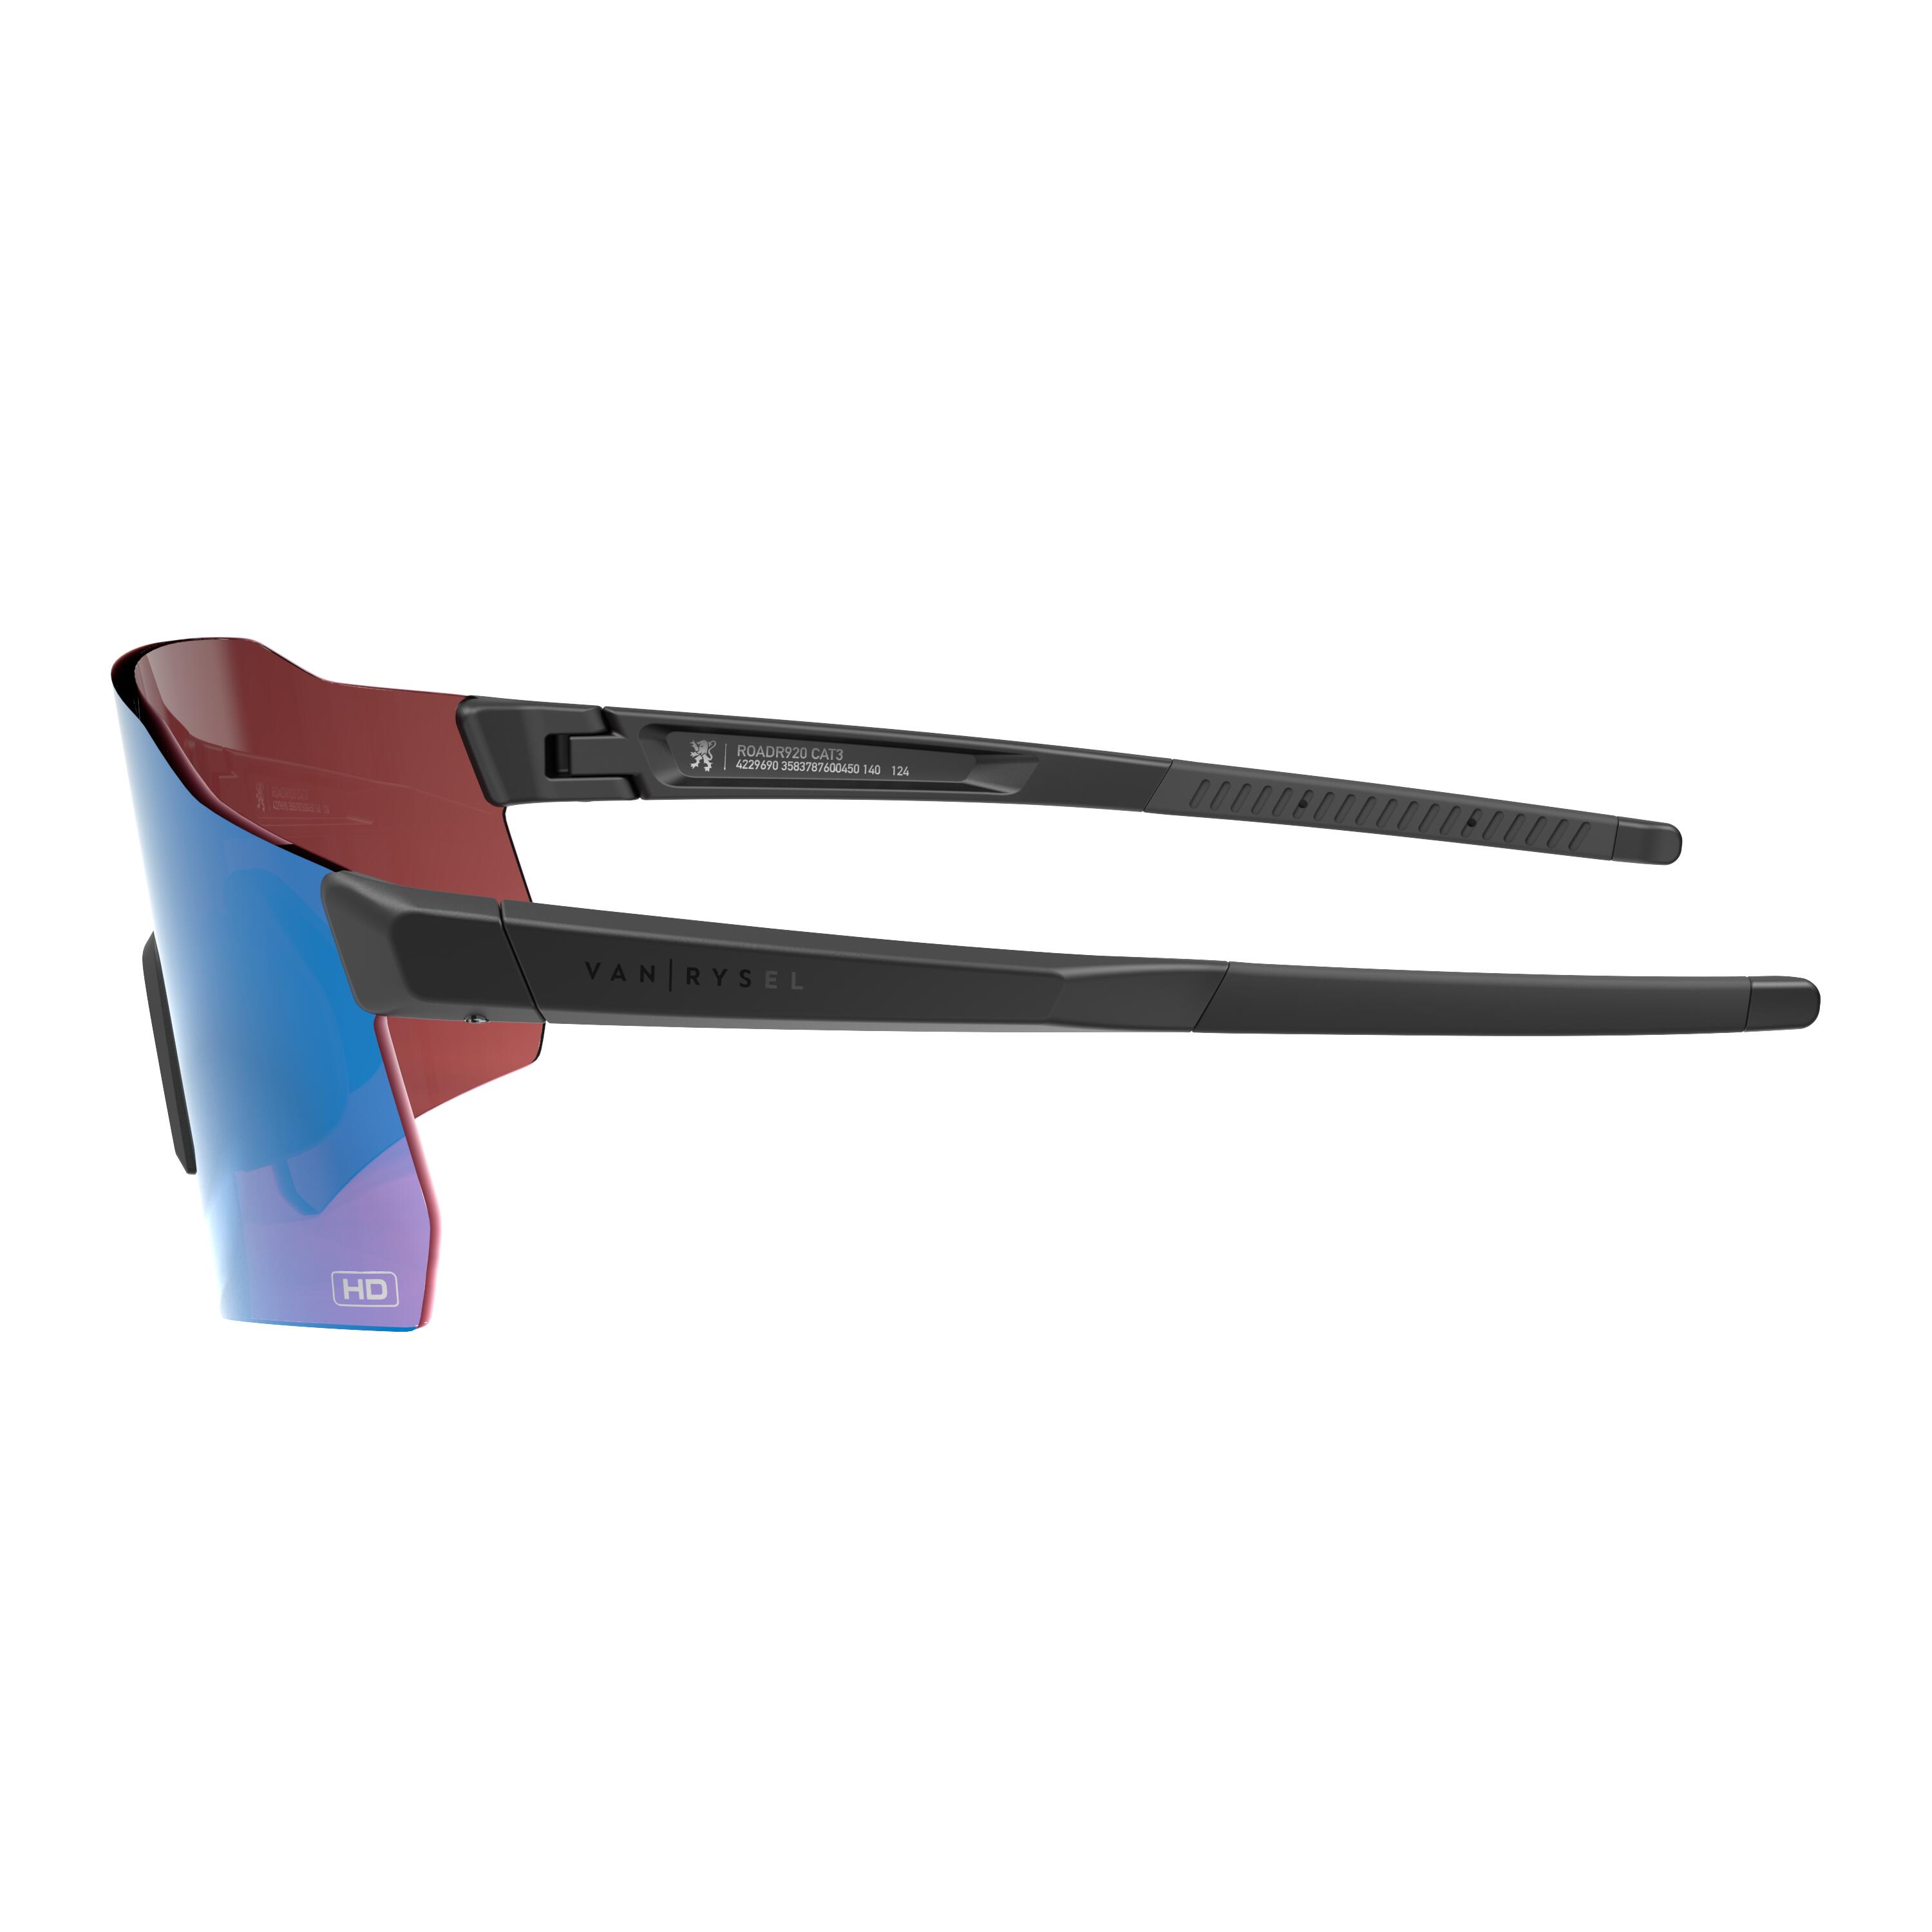 Adult Cycling Sunglasses RoadR 920 Category 3 High-Definition - Blue 3/6